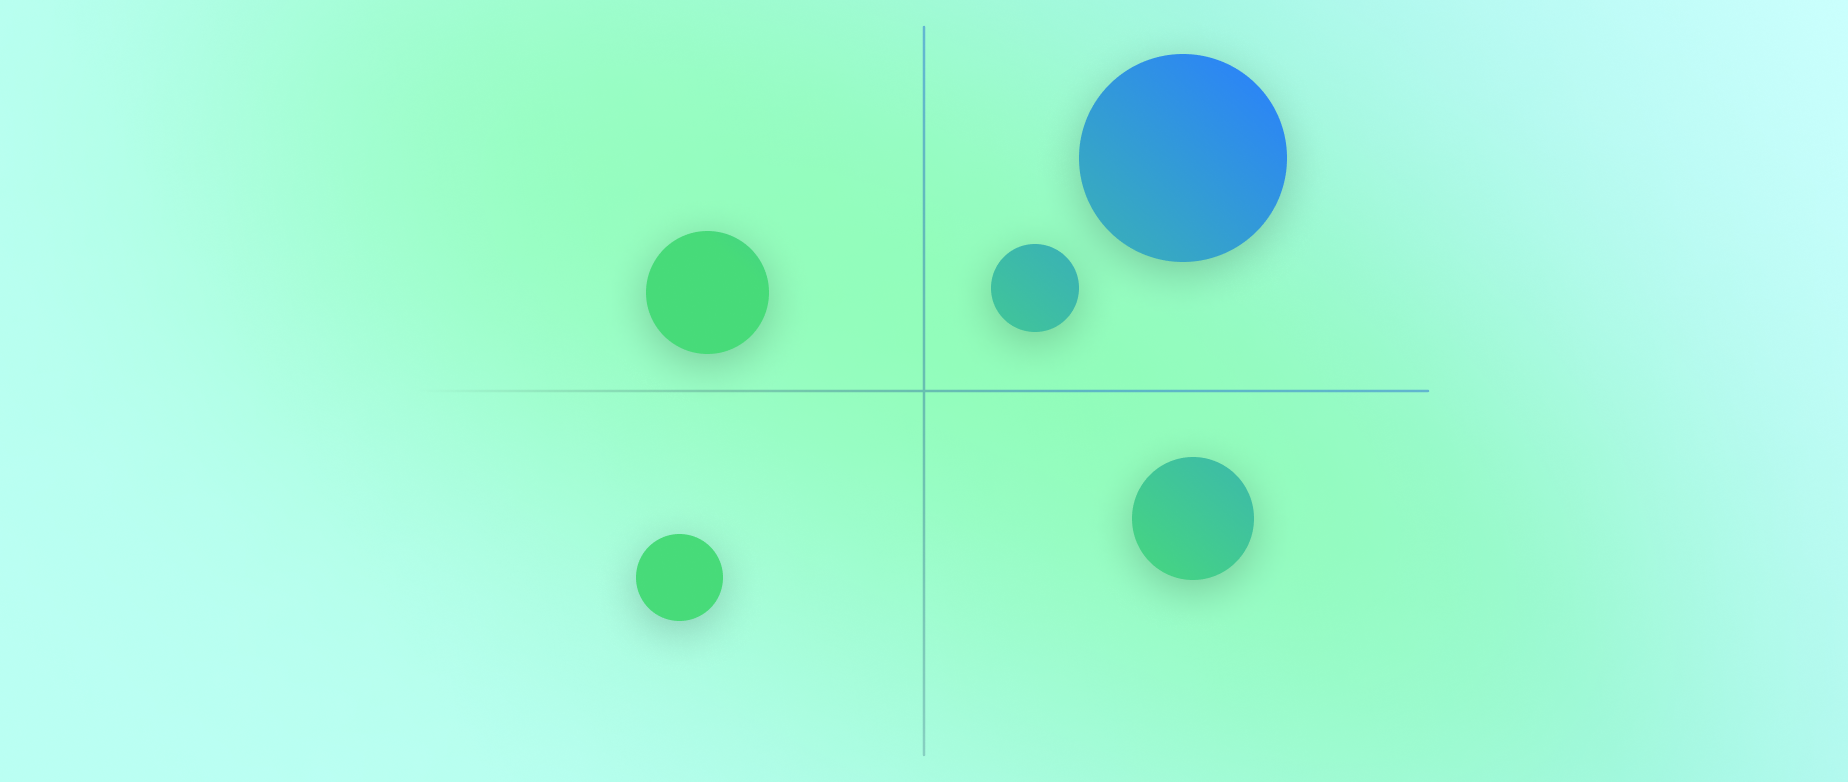 Illustration of a product positioning matrix on a green background.